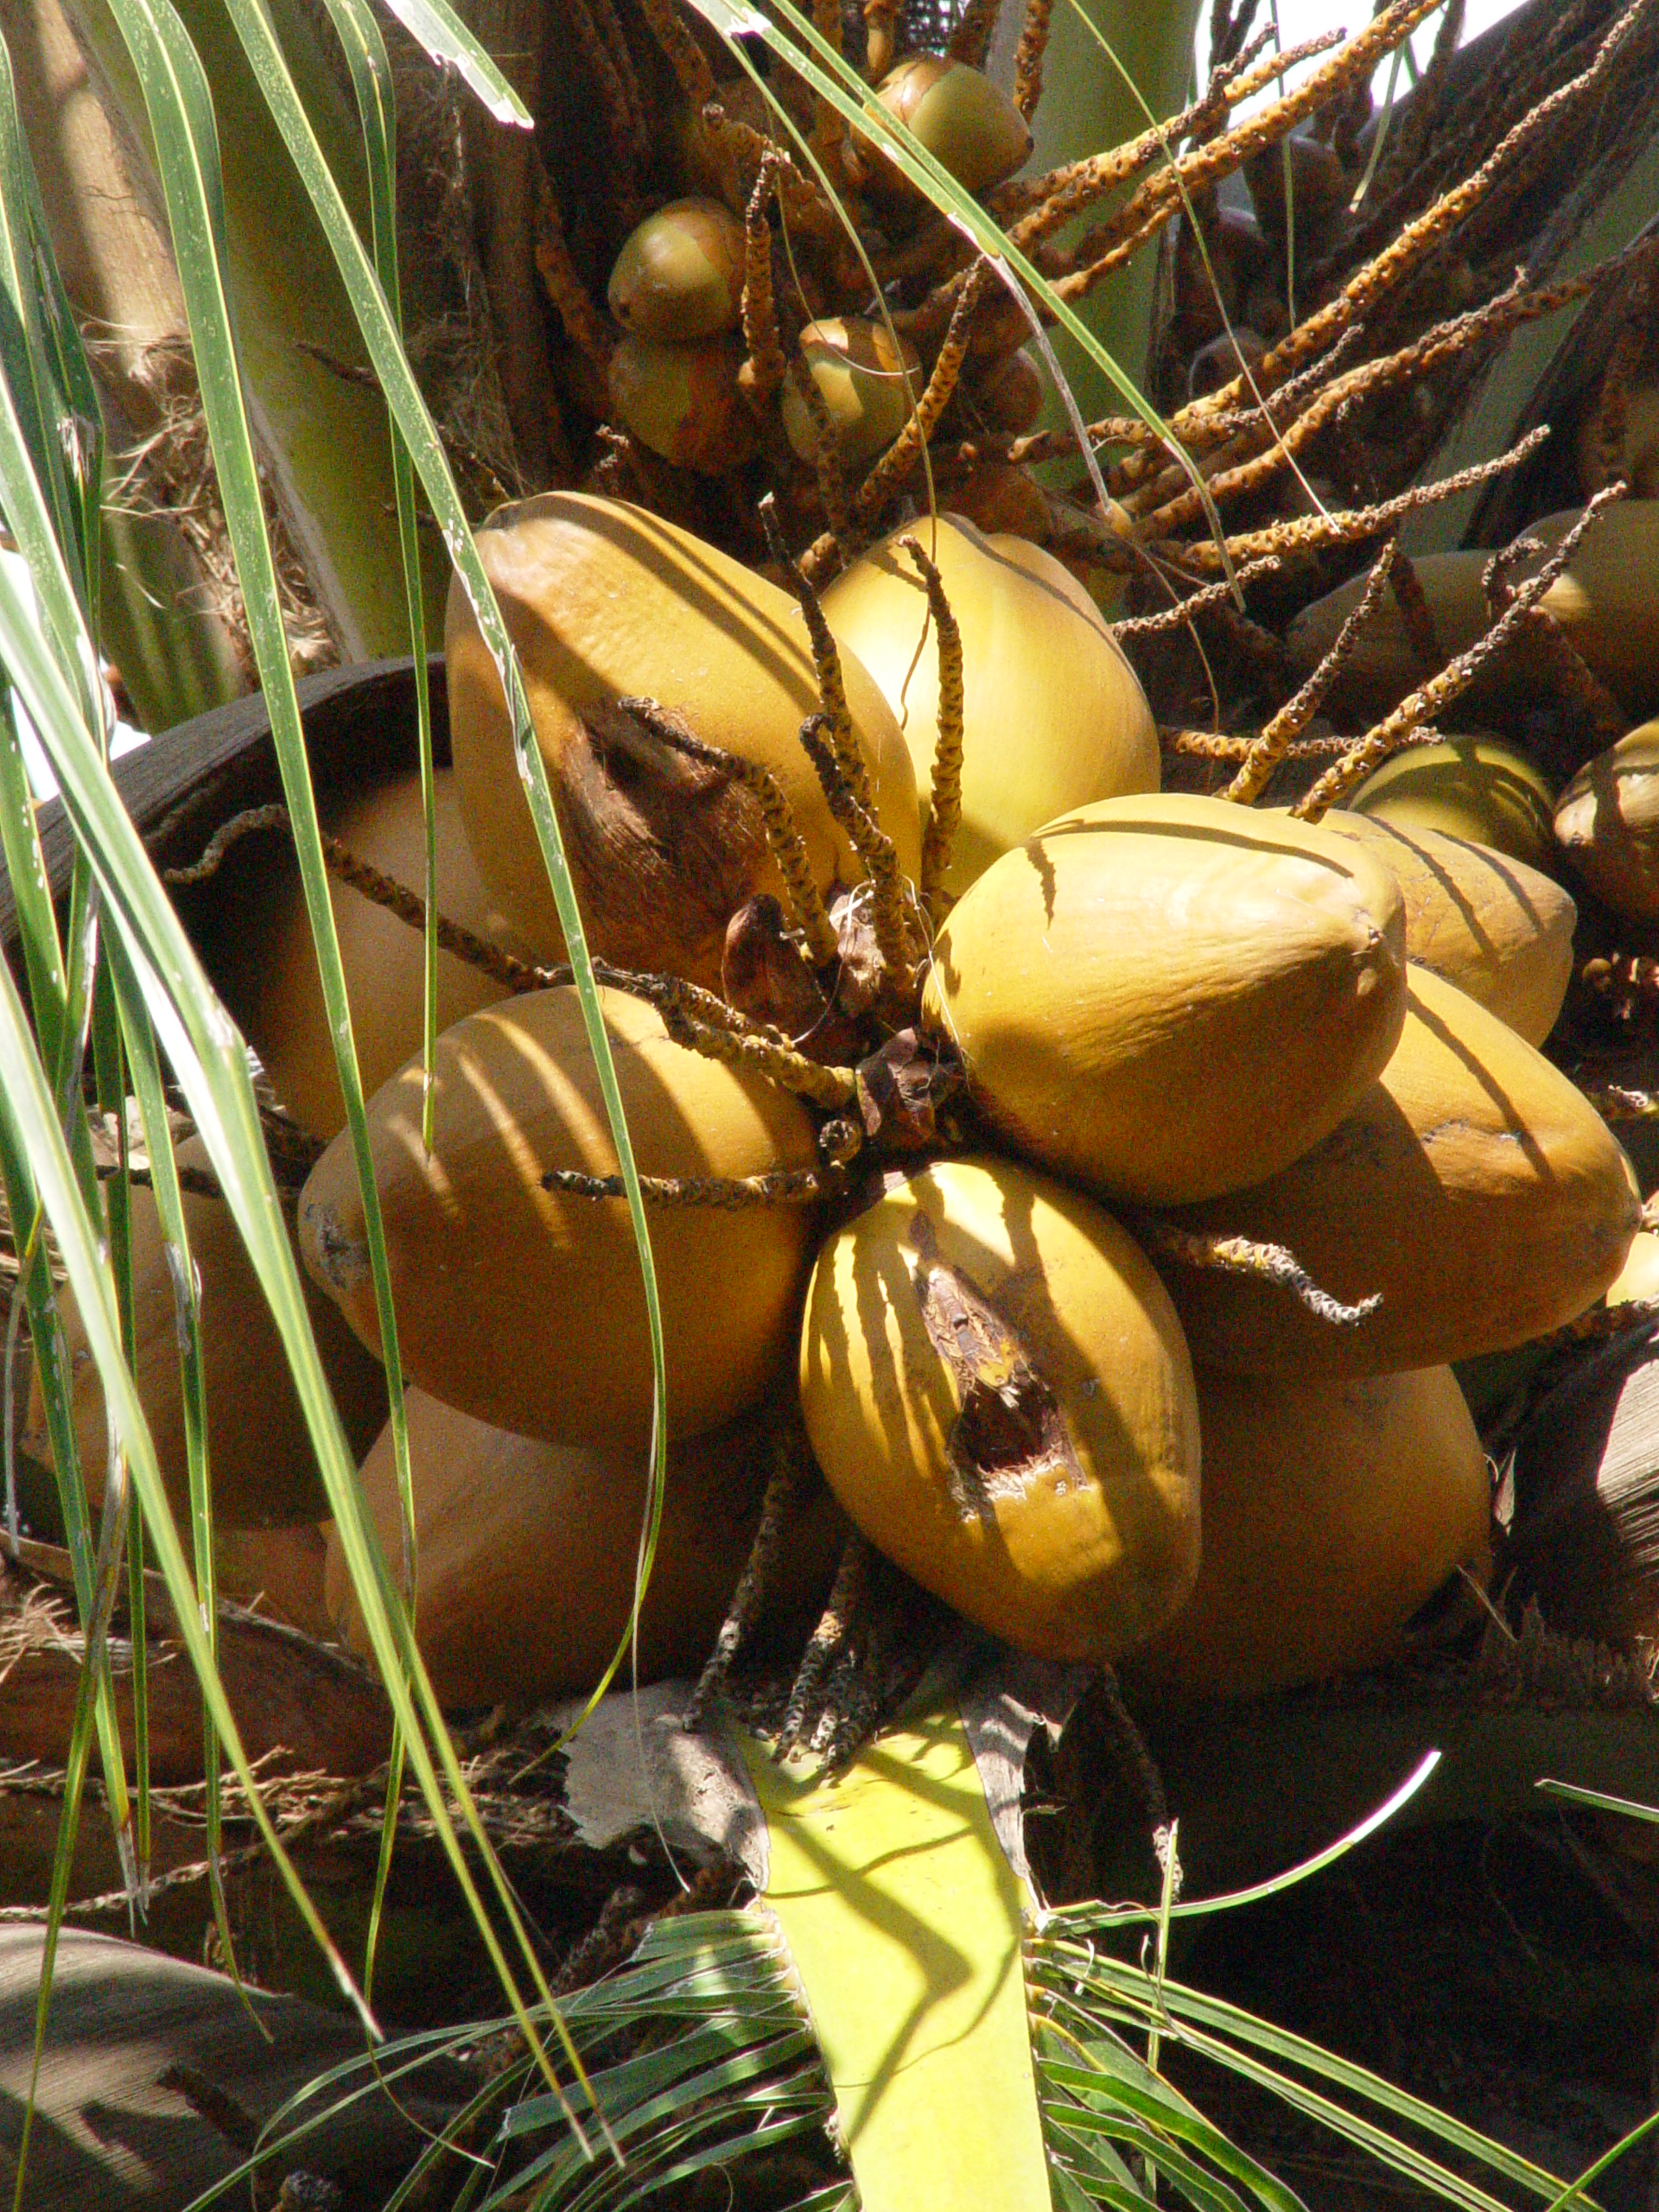 File:Coconut bunch in the tree.JPG - Wikimedia Commons